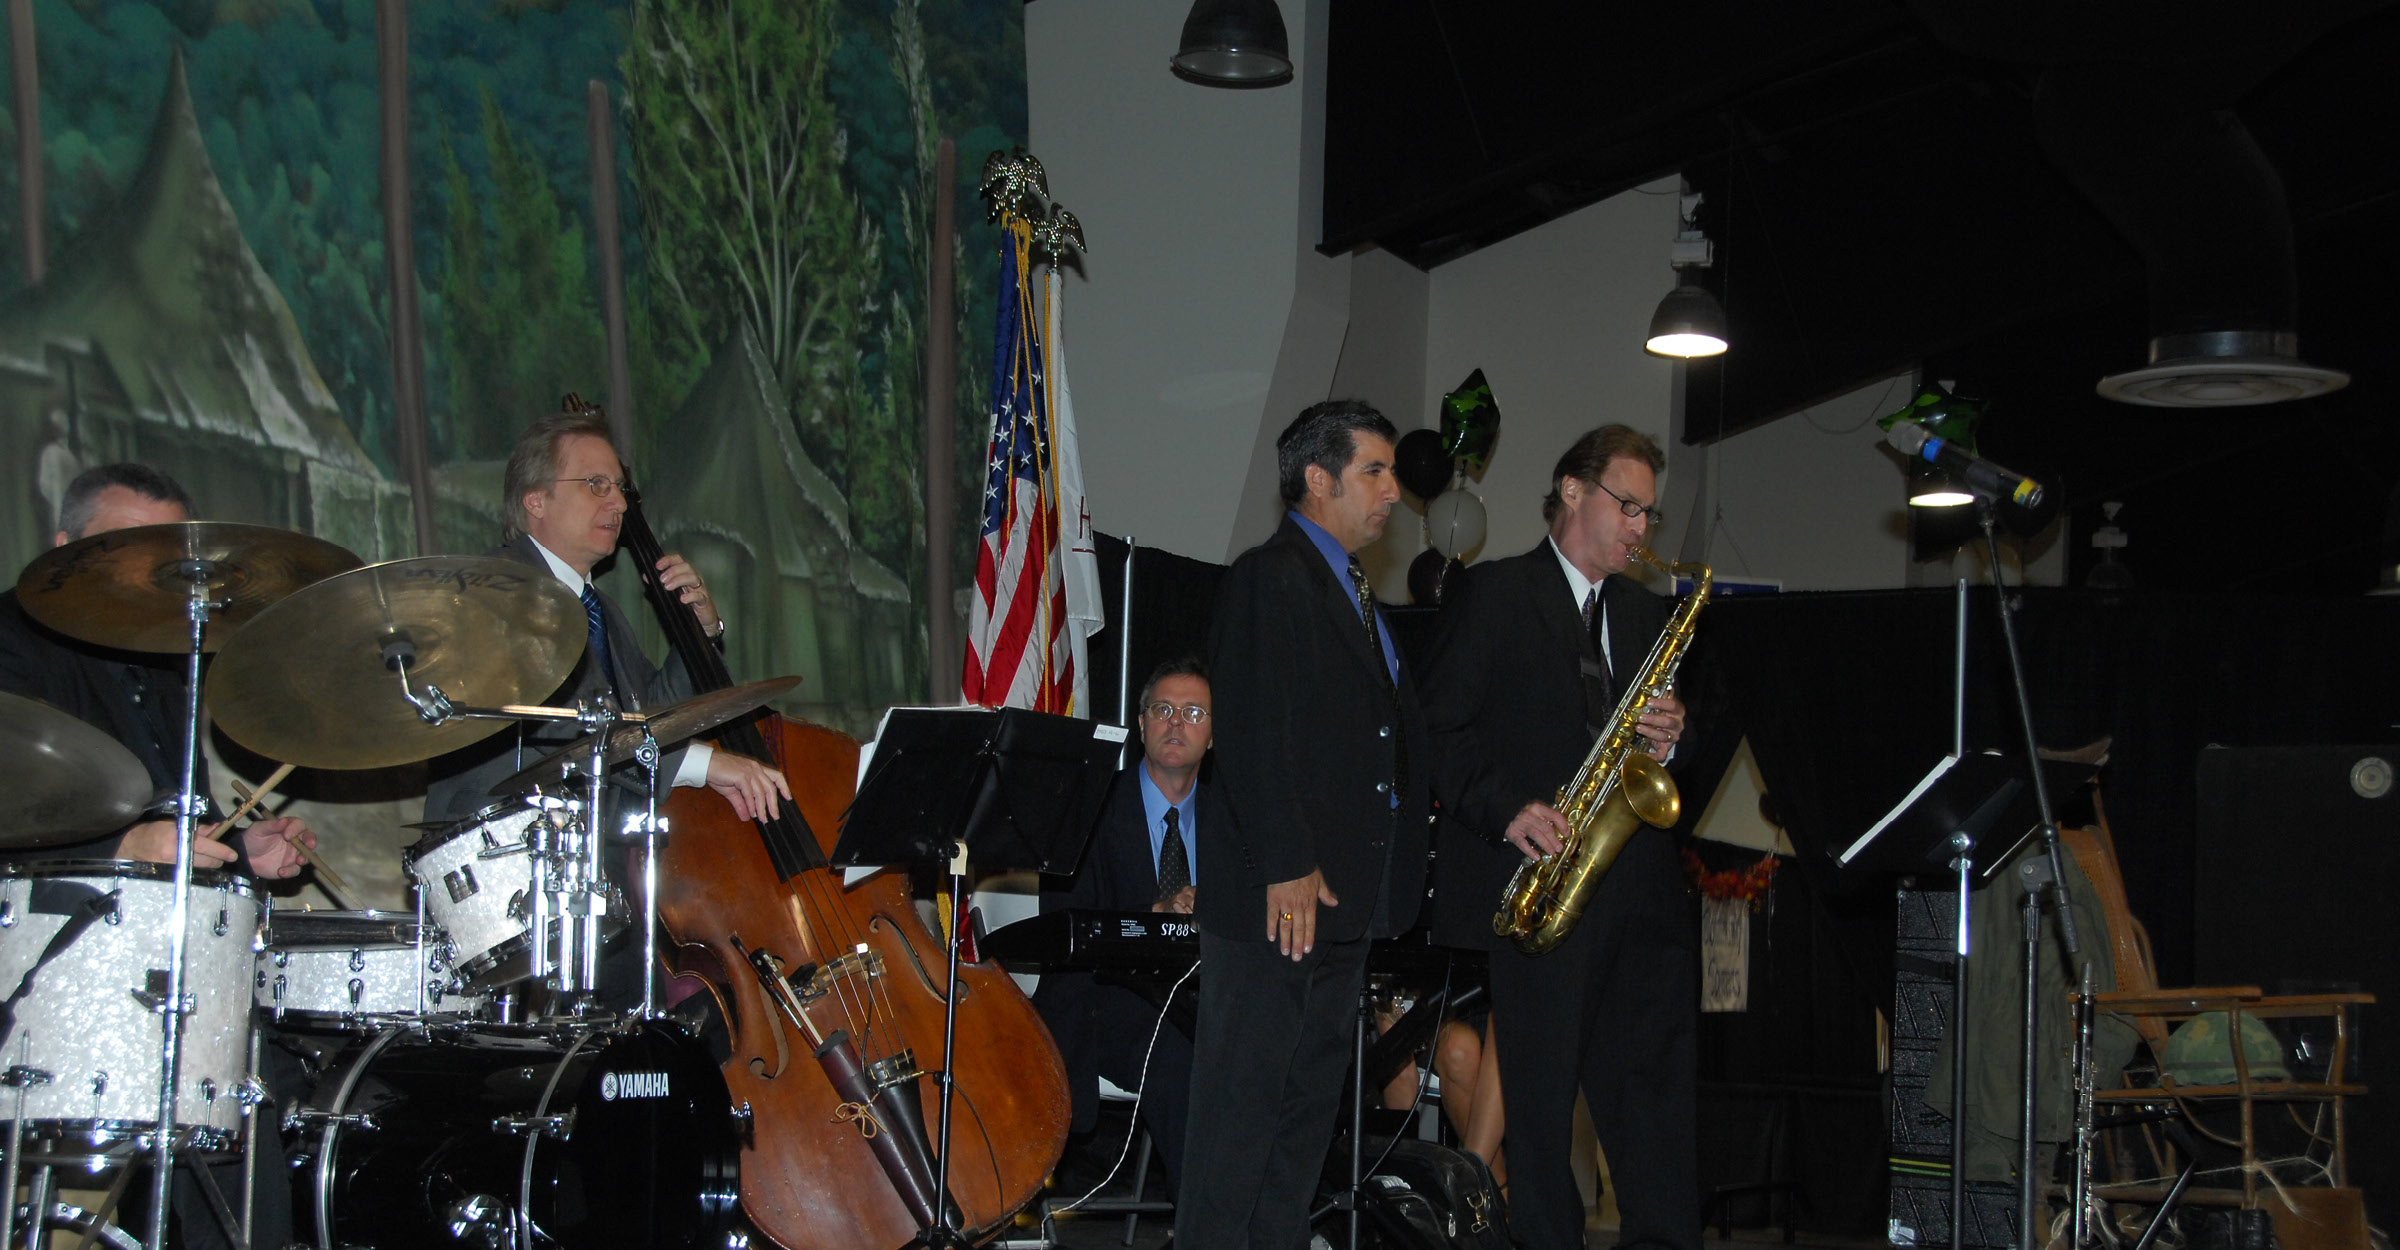 Jazz band playing on stage